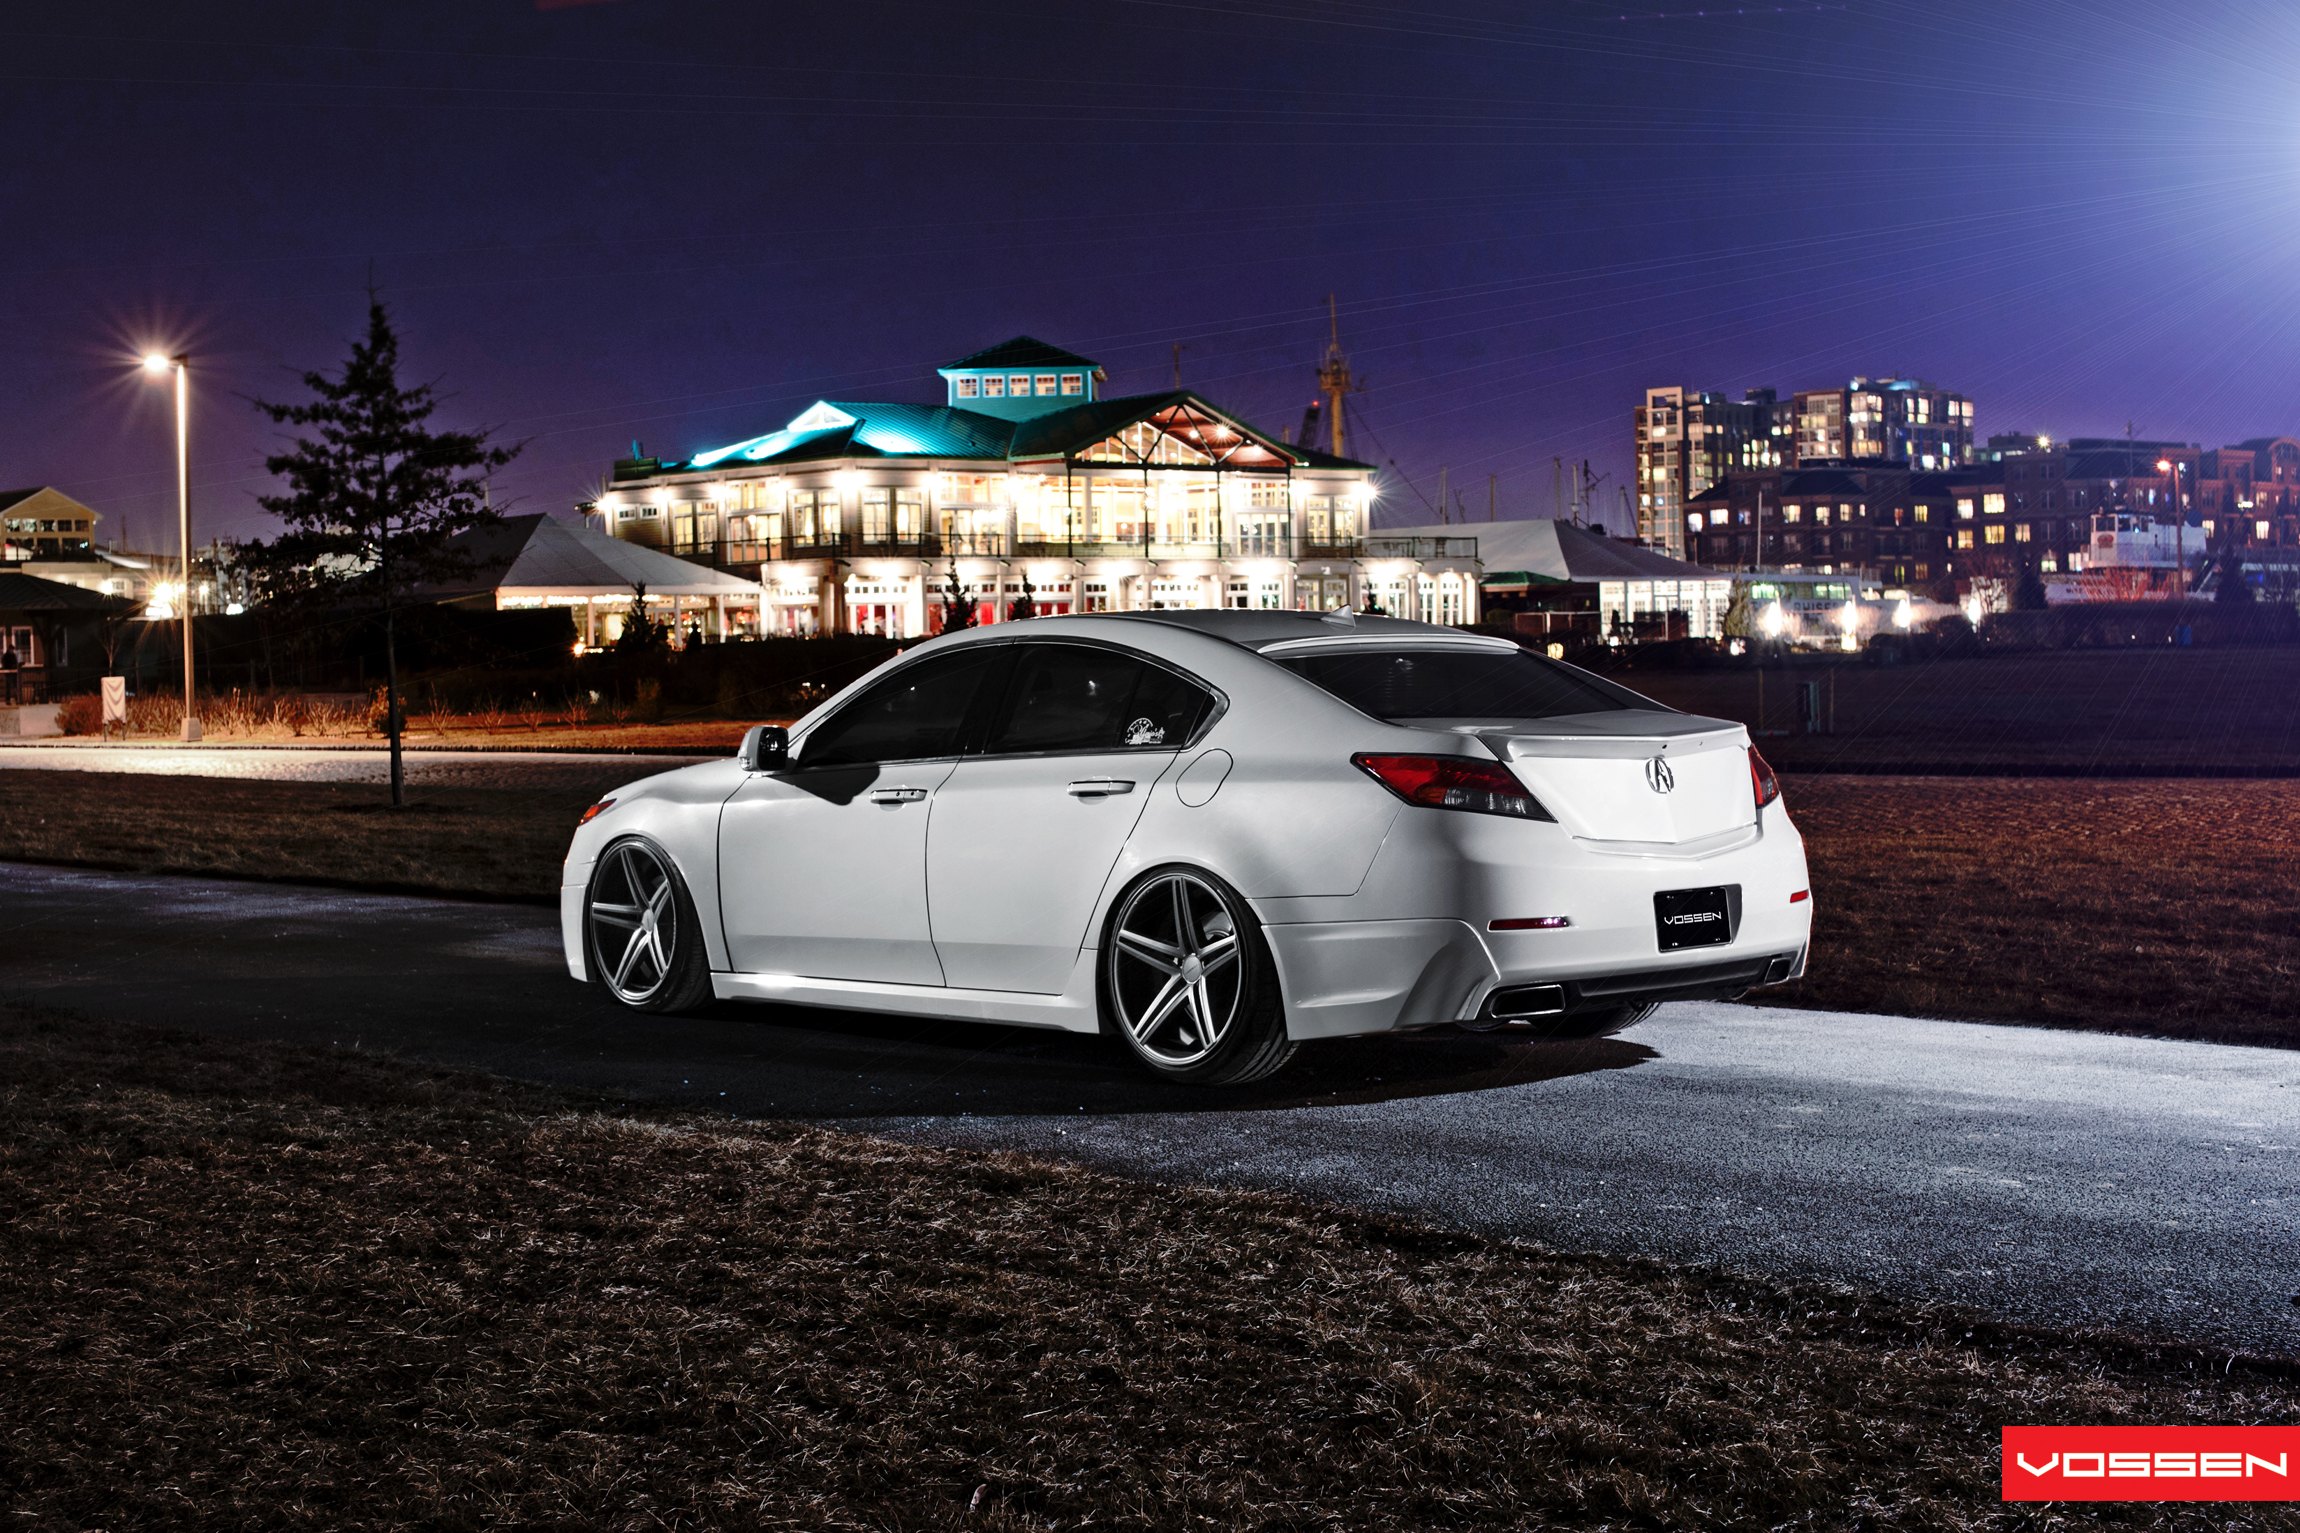 Aftermarket Rear Diffuser on White Acura TL - Photo by Vossen